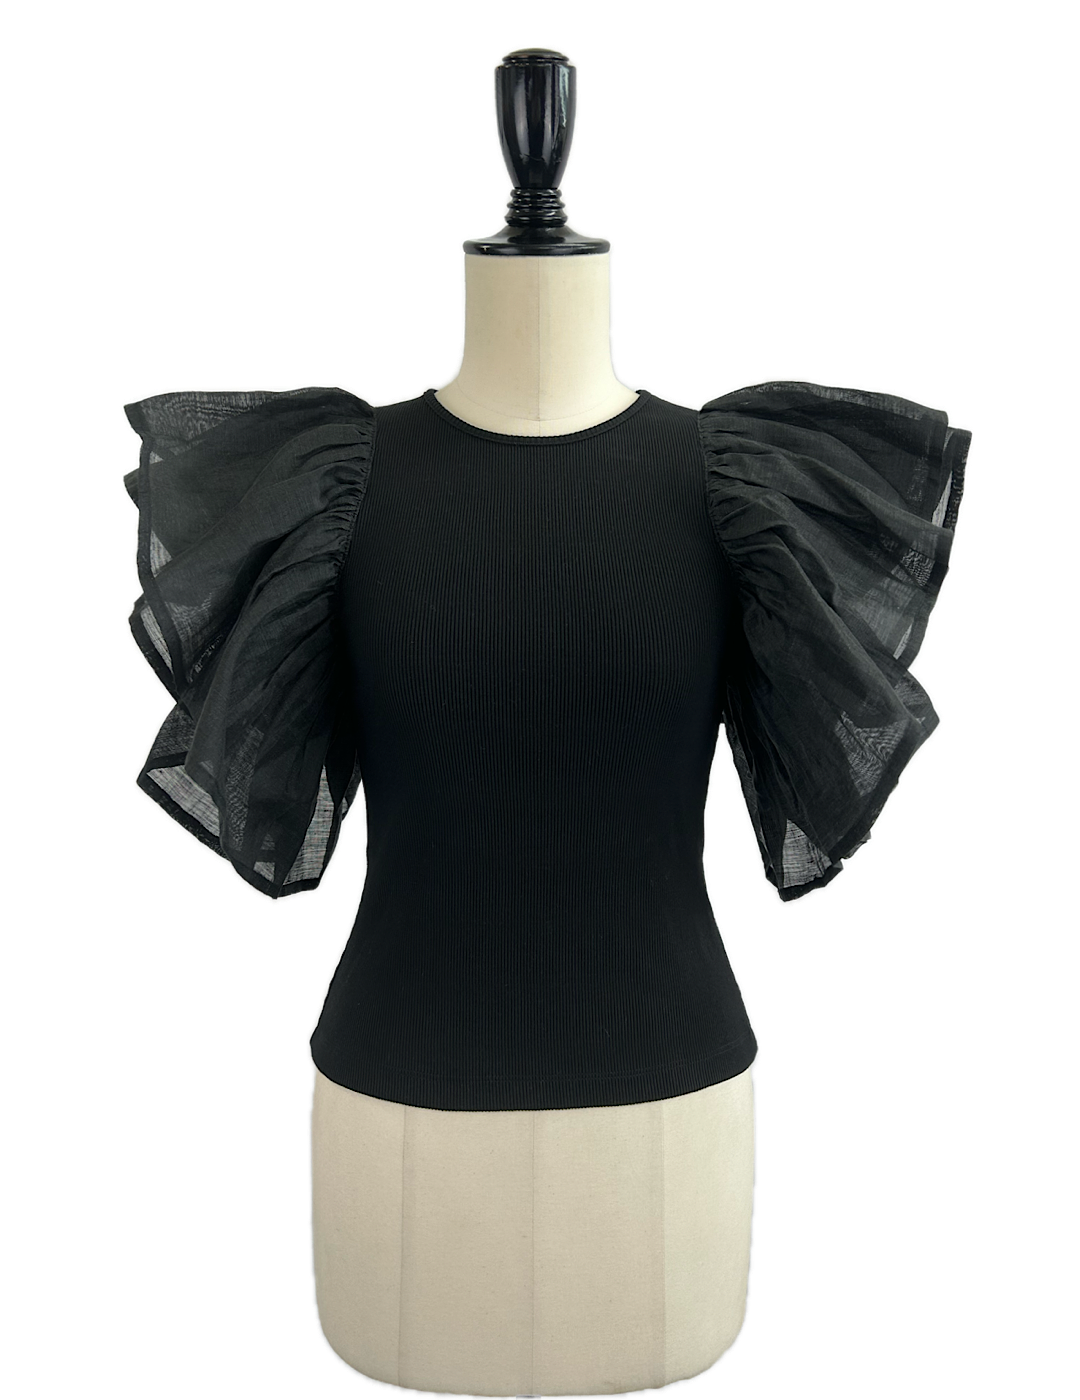 <img class='new_mark_img1' src='https://img.shop-pro.jp/img/new/icons6.gif' style='border:none;display:inline;margin:0px;padding:0px;width:auto;' />MEIMEIJ / RUFFLE SLEEVE TOPS